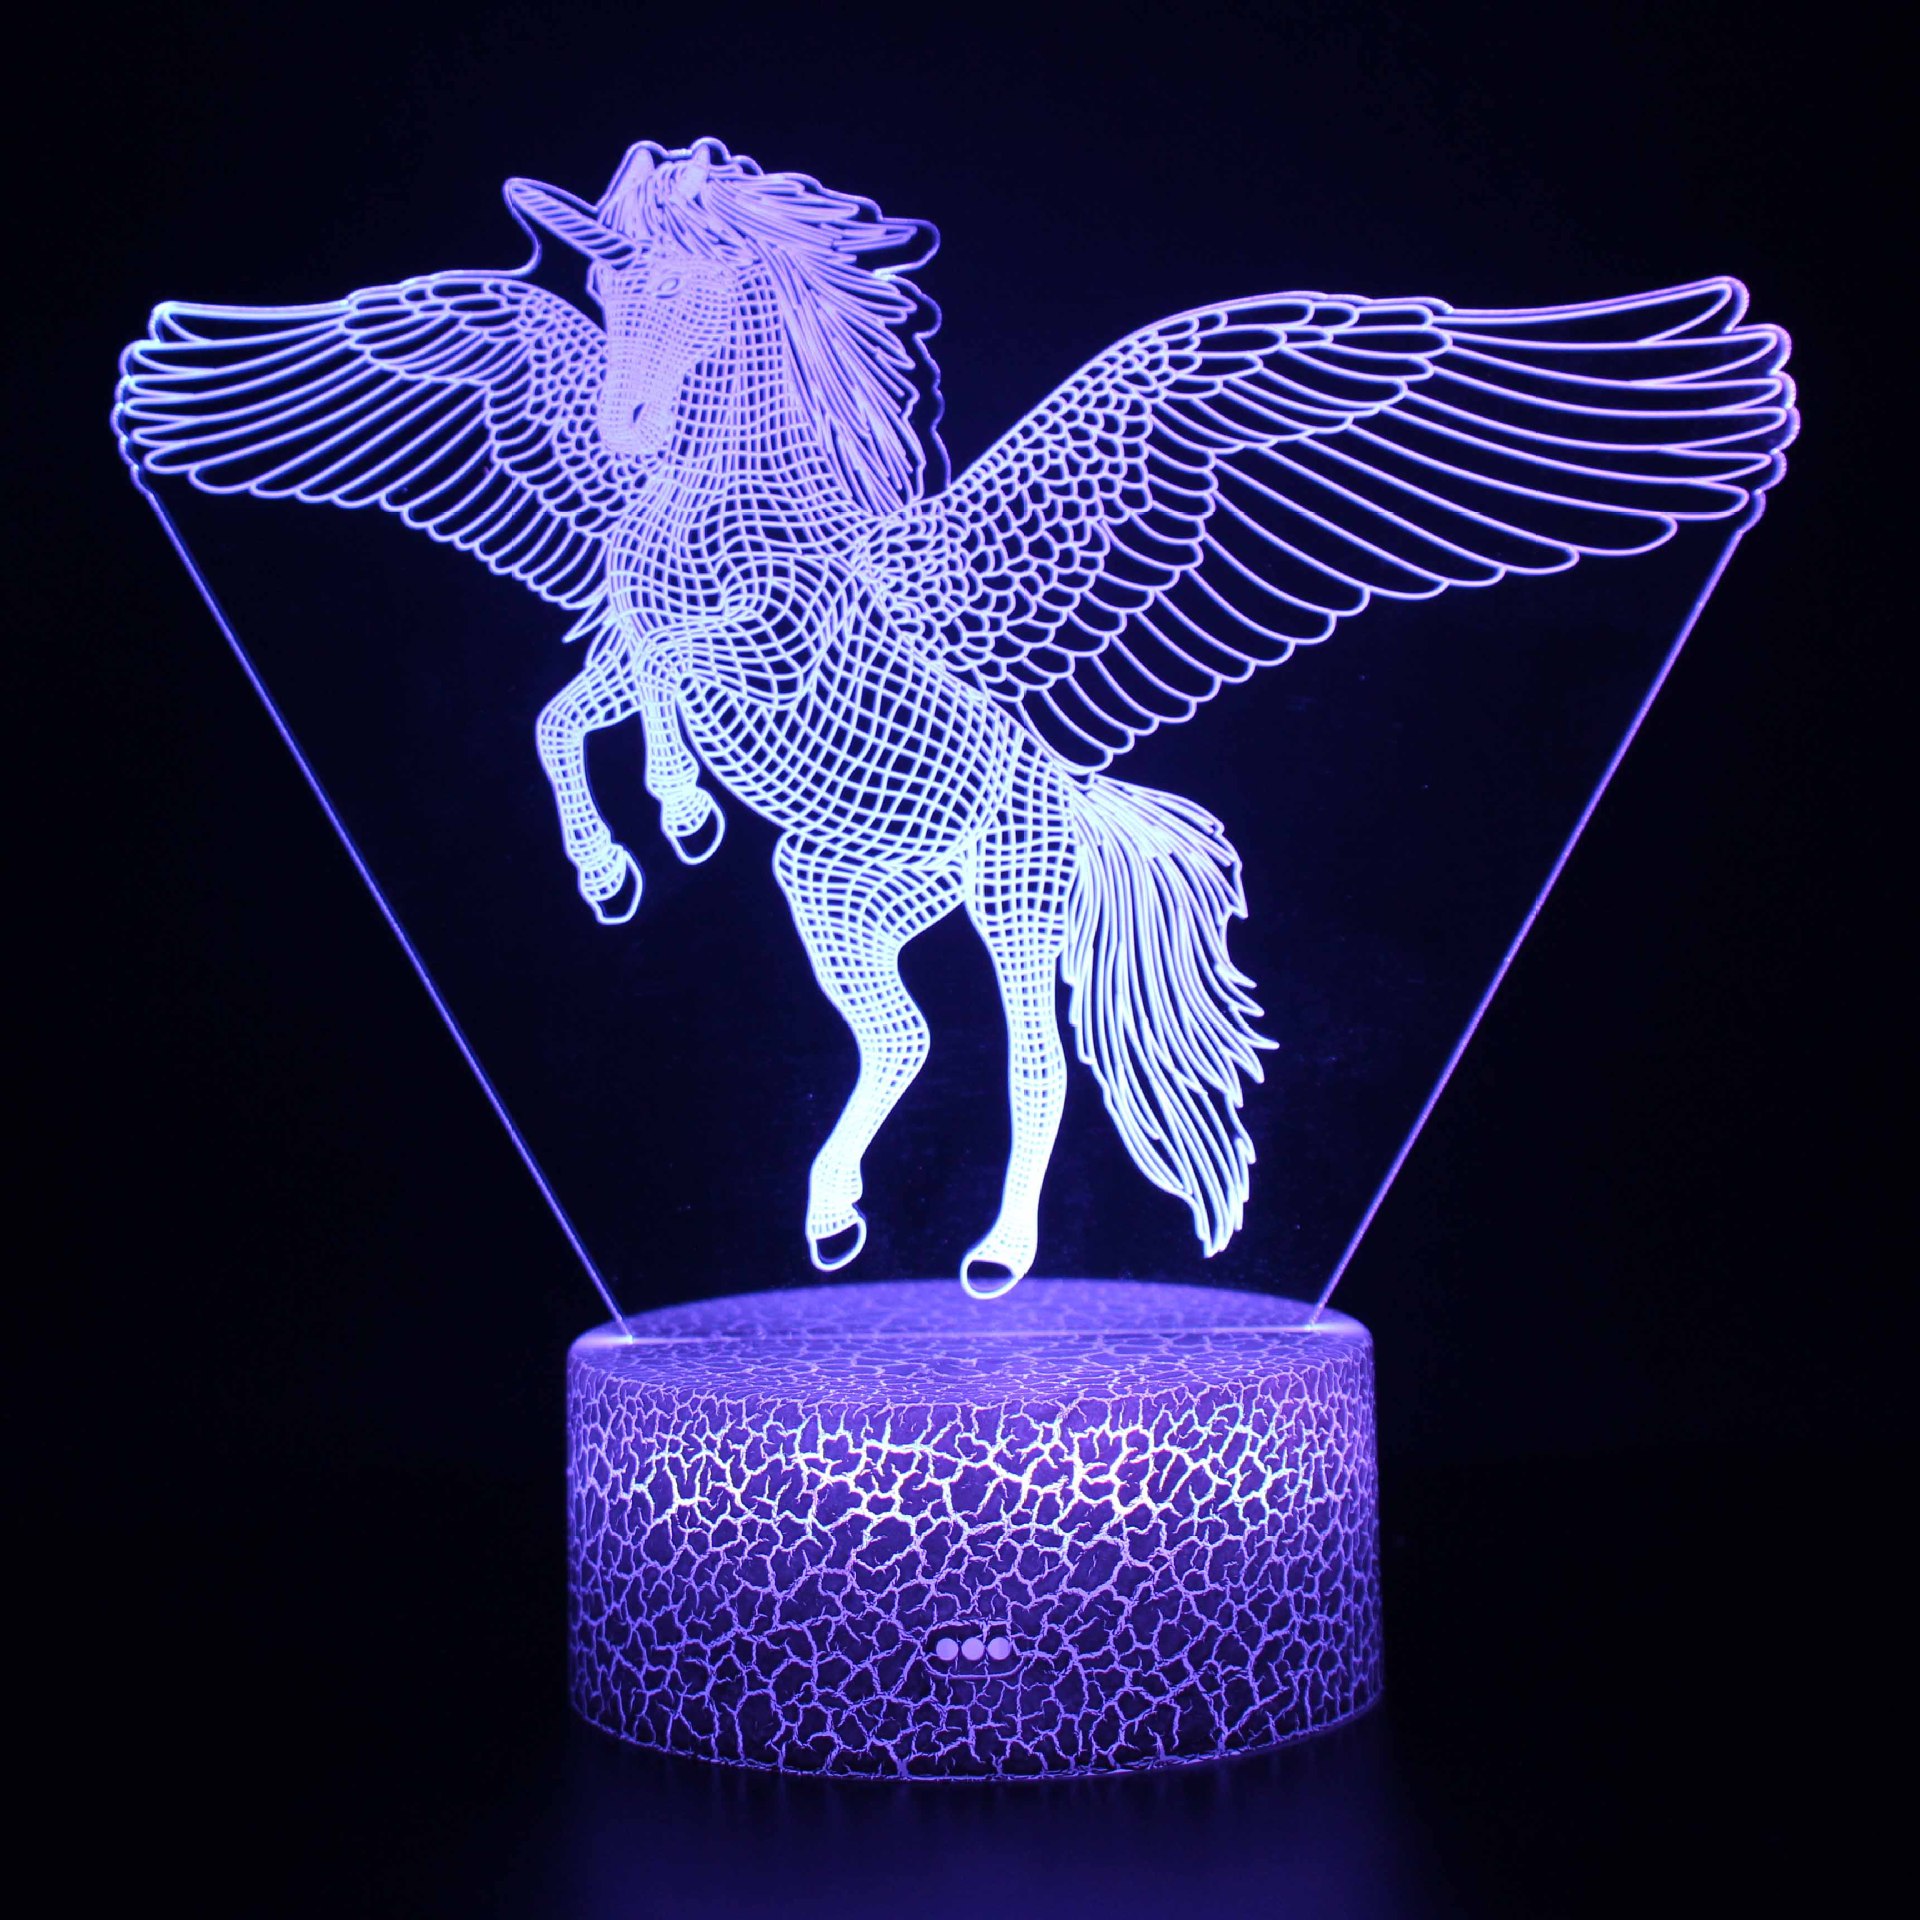 Customized Cross-Border 3D Small Night Lamp Dormitory Unicorn Acrylic Led Small Table Lamp Bedside Atmosphere Decoration Small Night Lamp